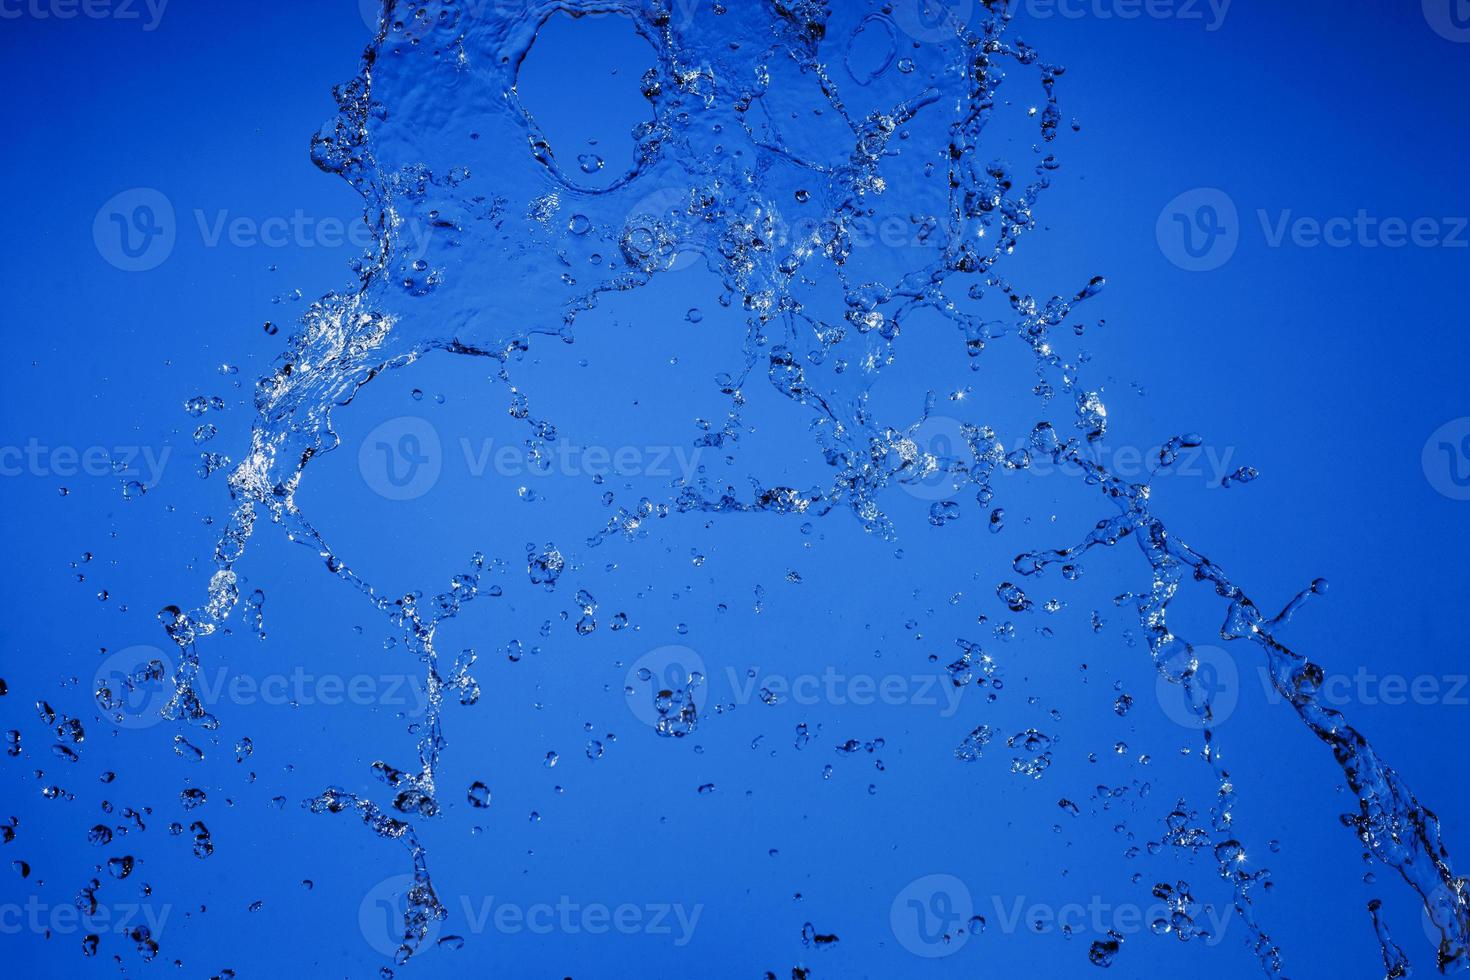 Falling water on a blue background photo